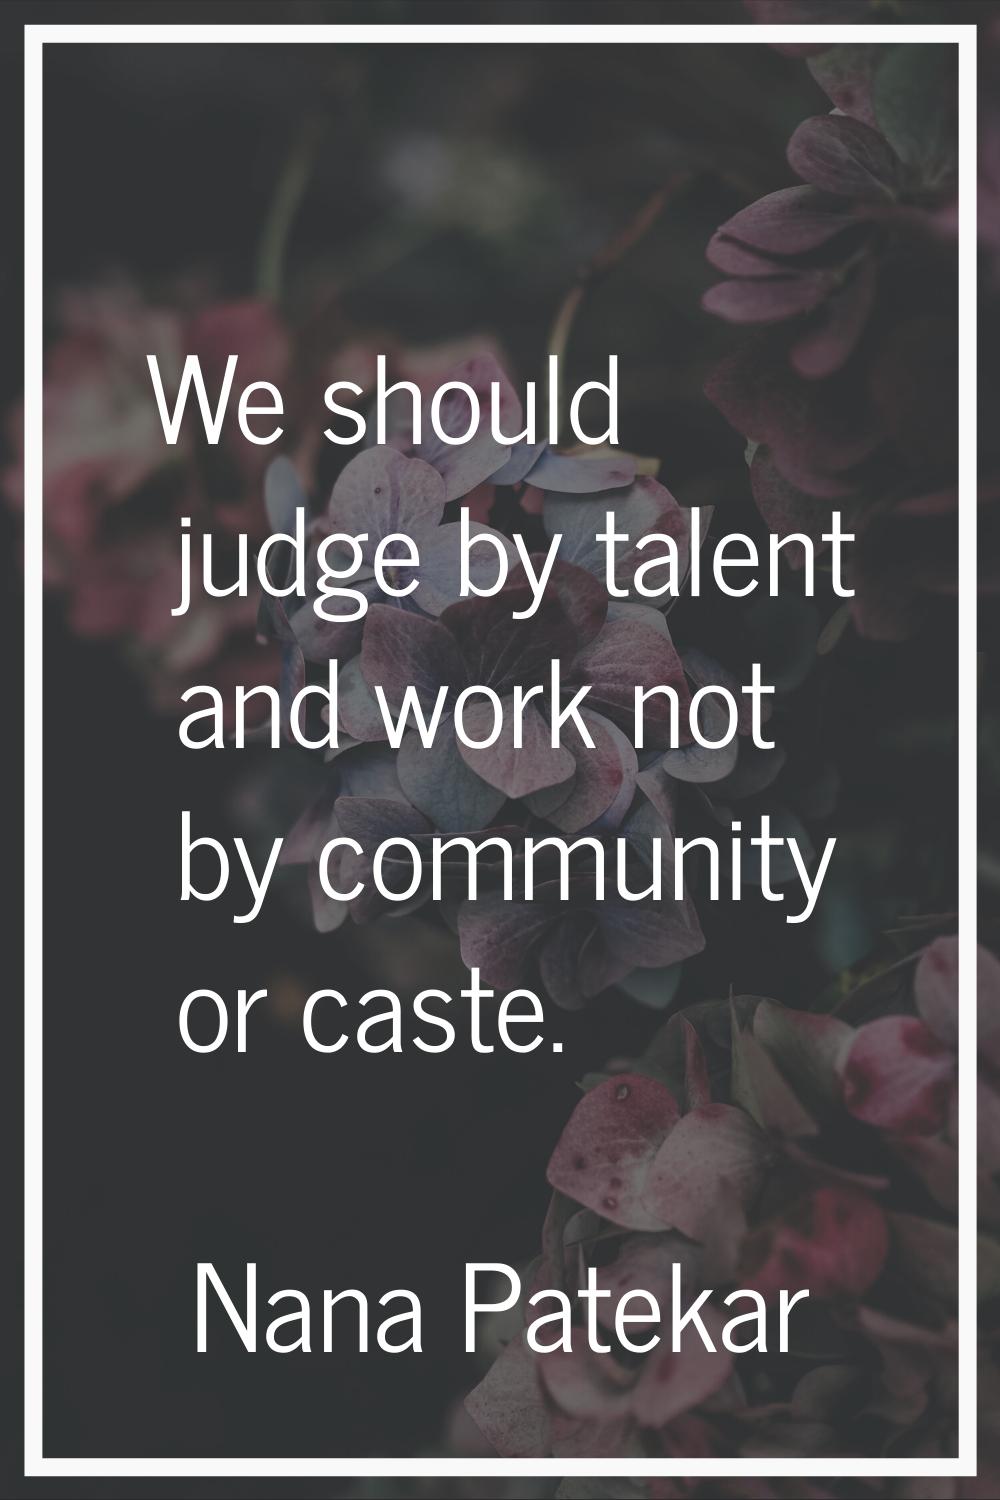 We should judge by talent and work not by community or caste.